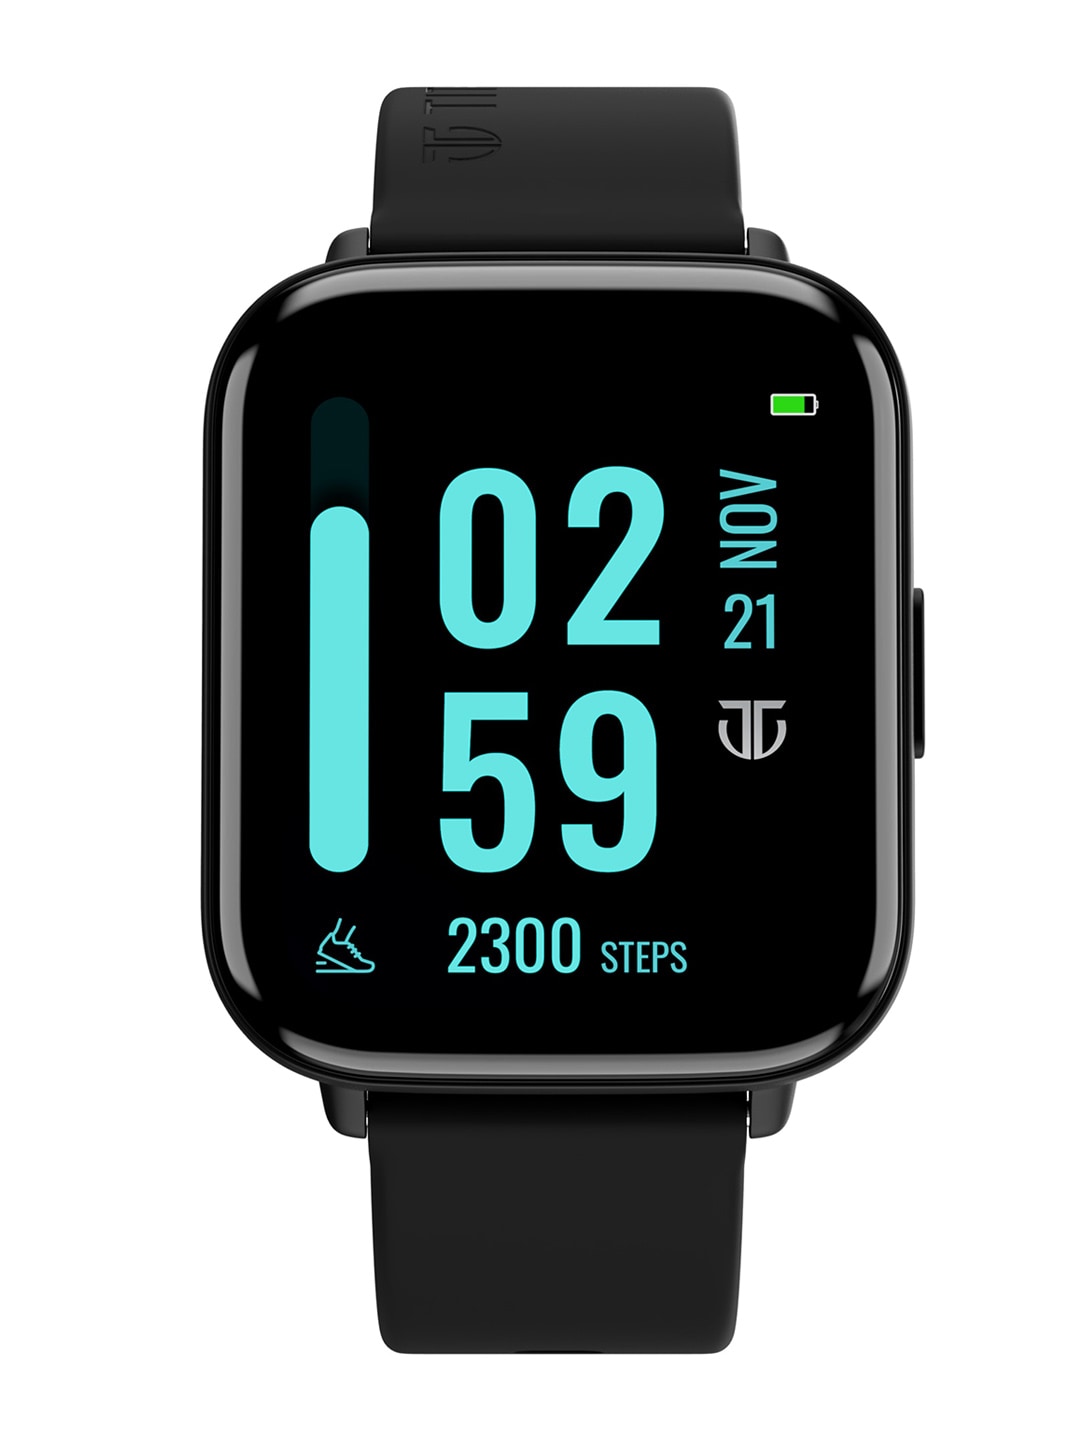 Titan Black Solid Smart Watches Price in India